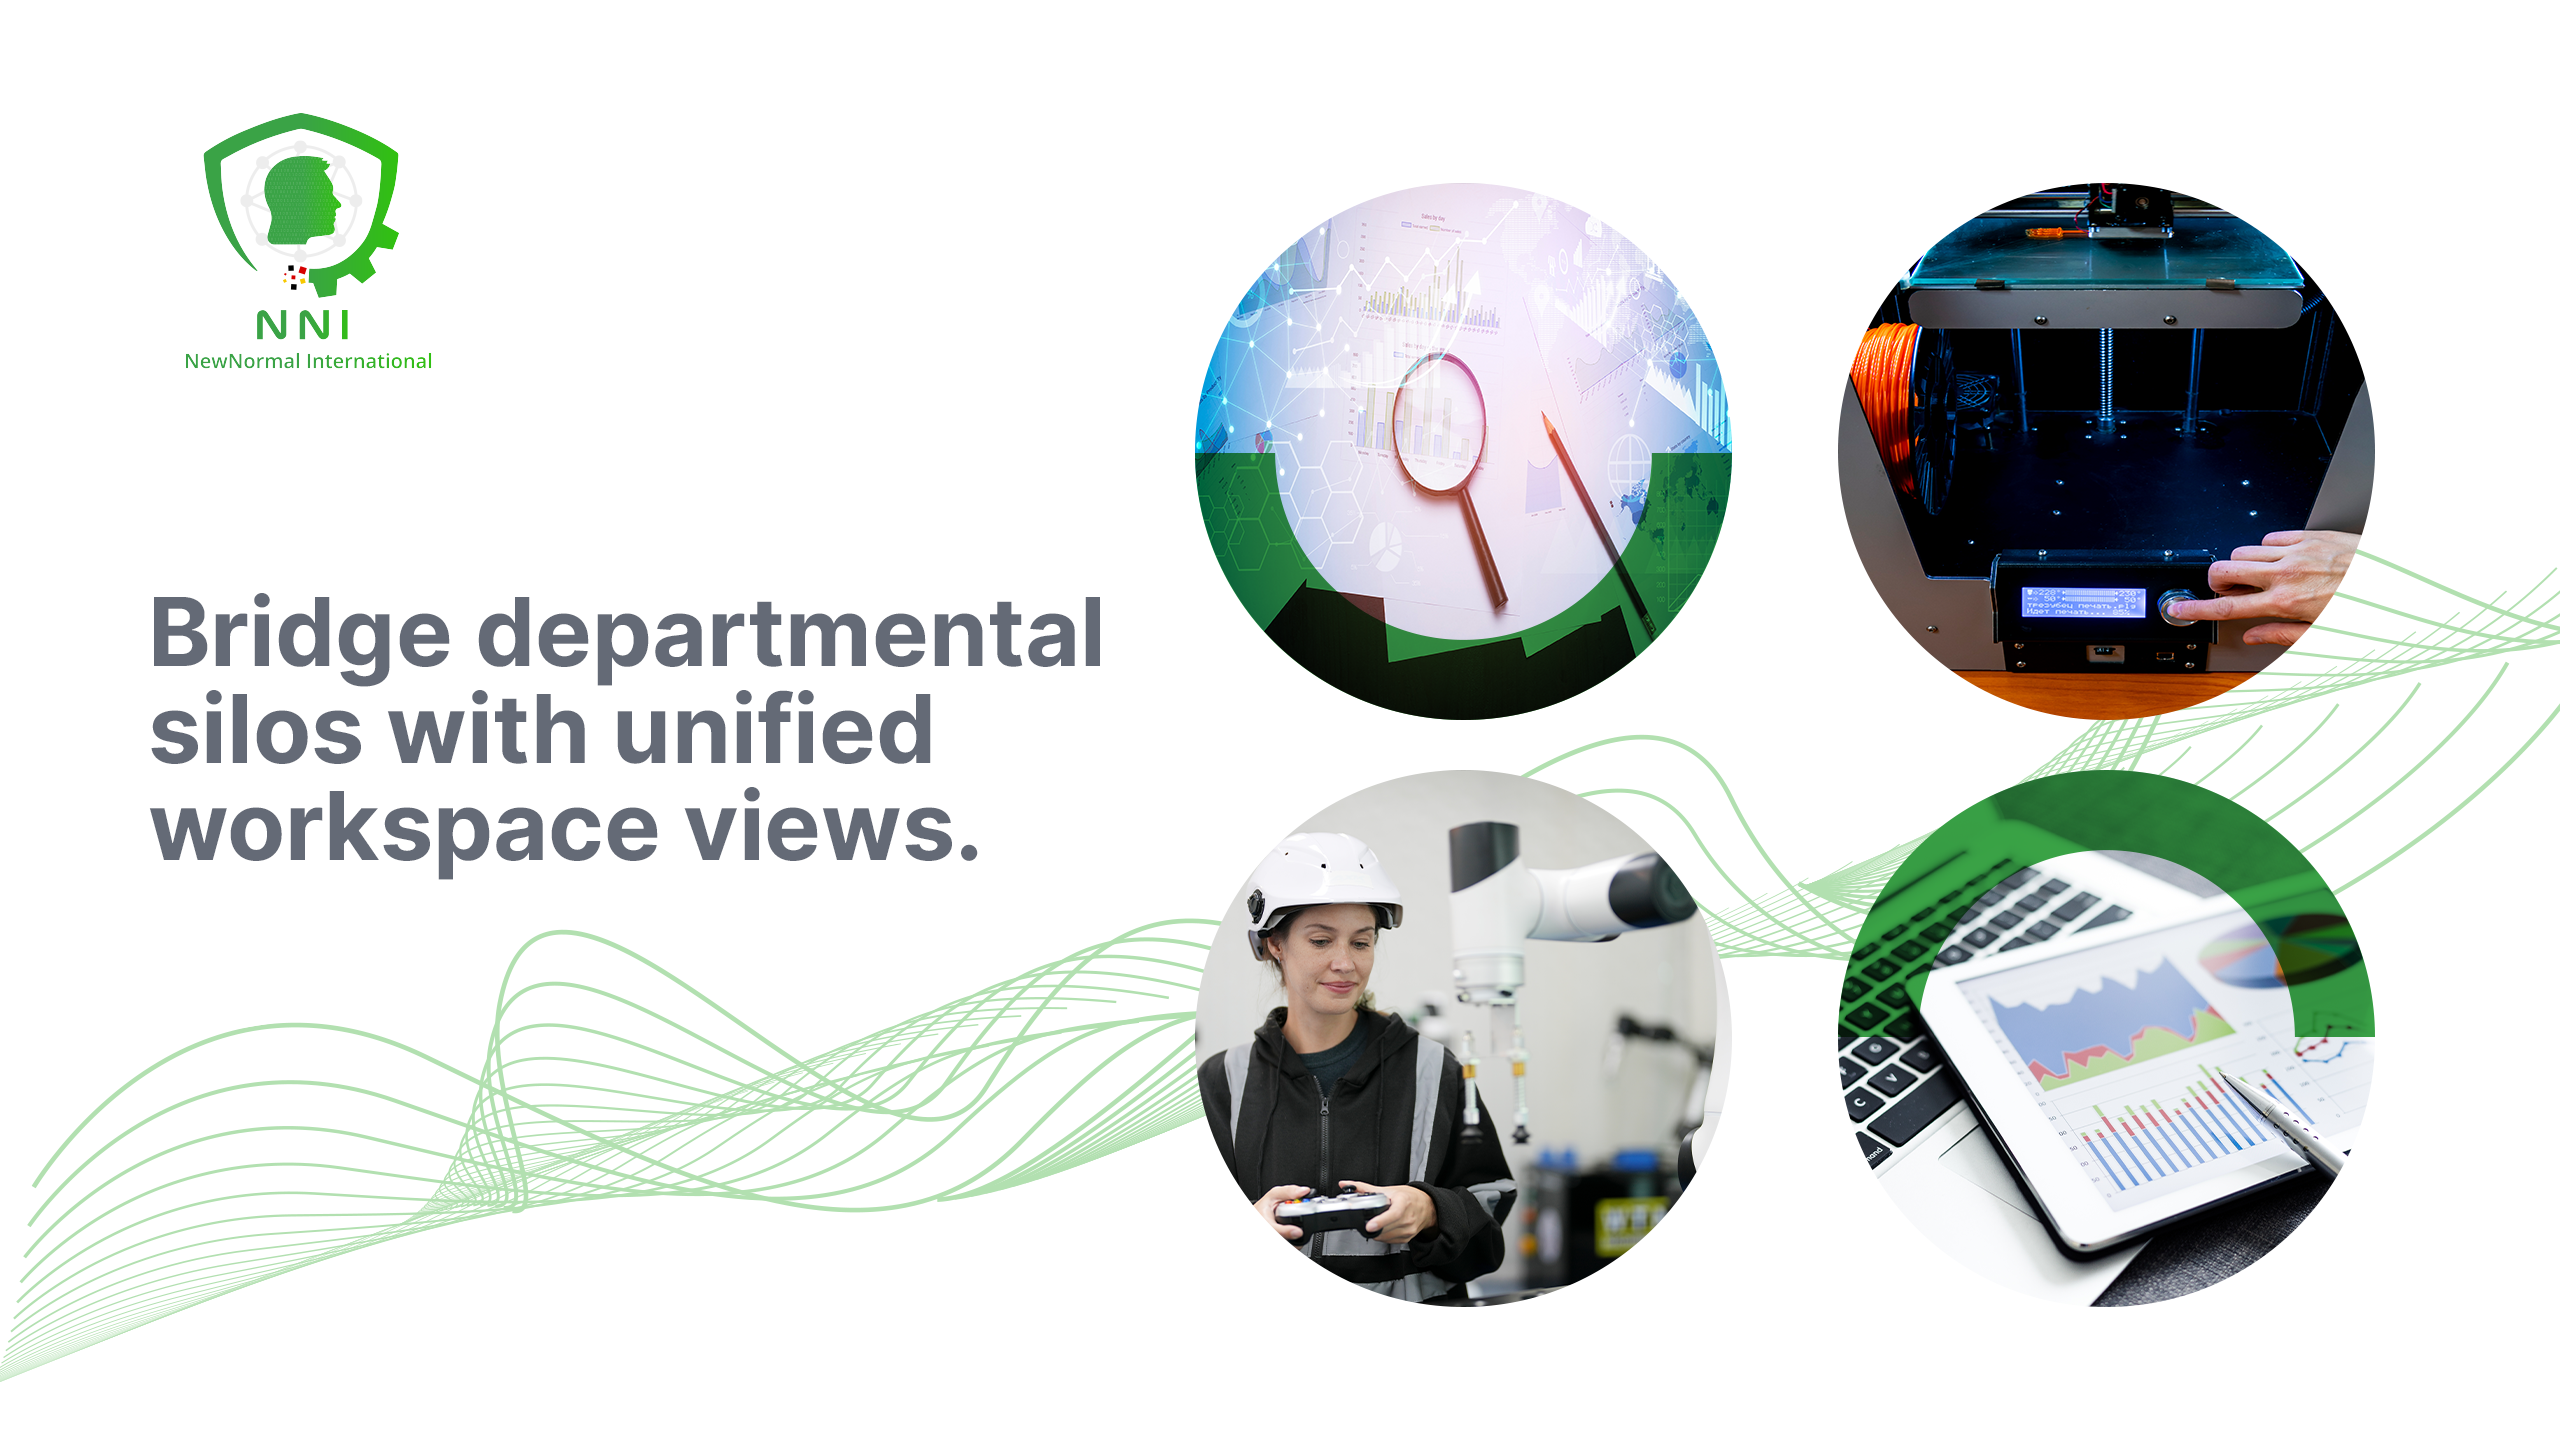 Unified Workspace Views